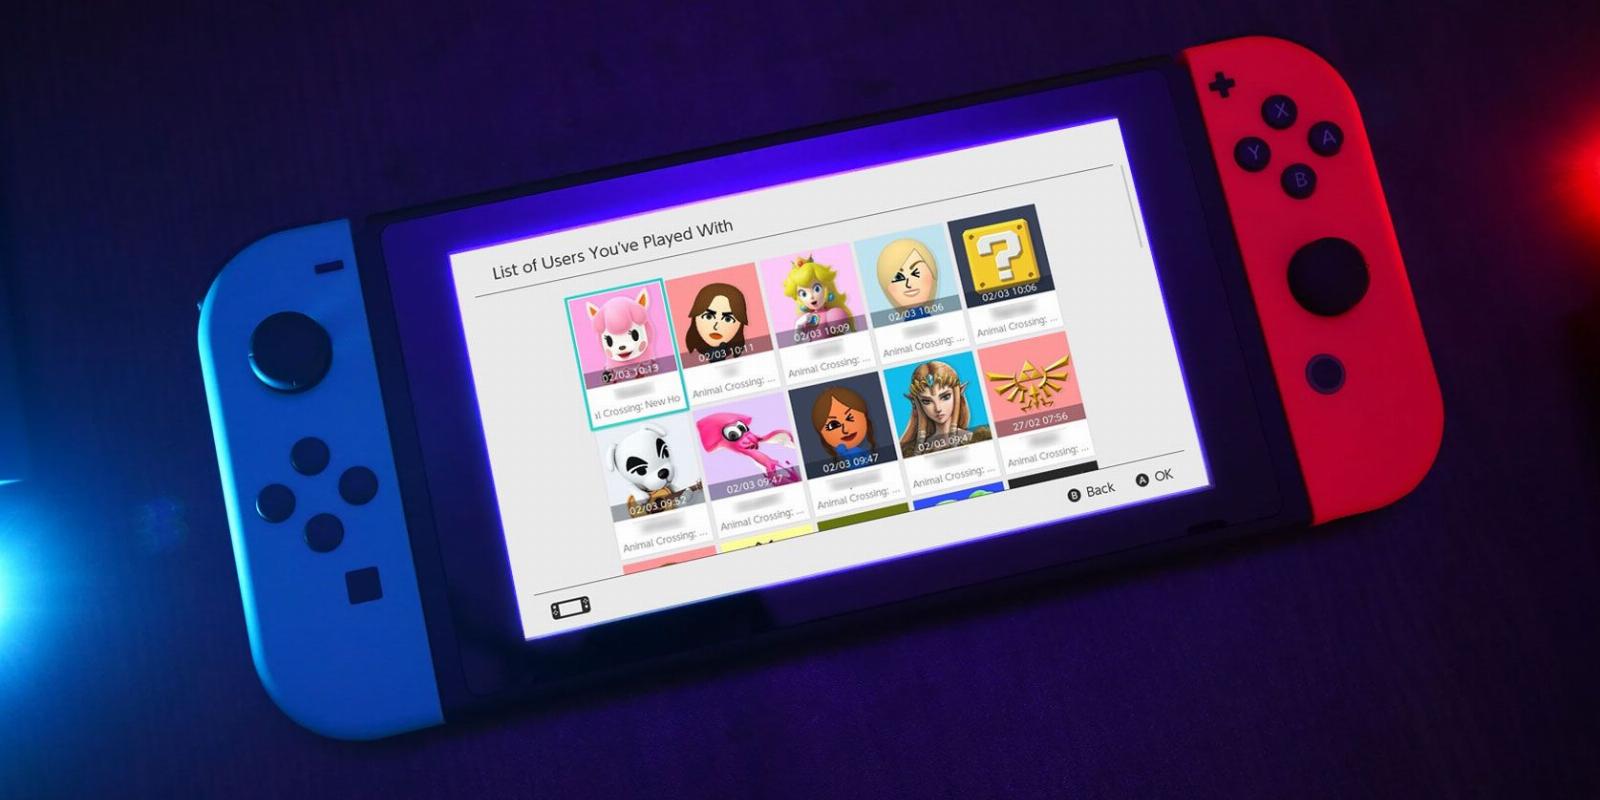 How to Add Friends on Your Nintendo Switch